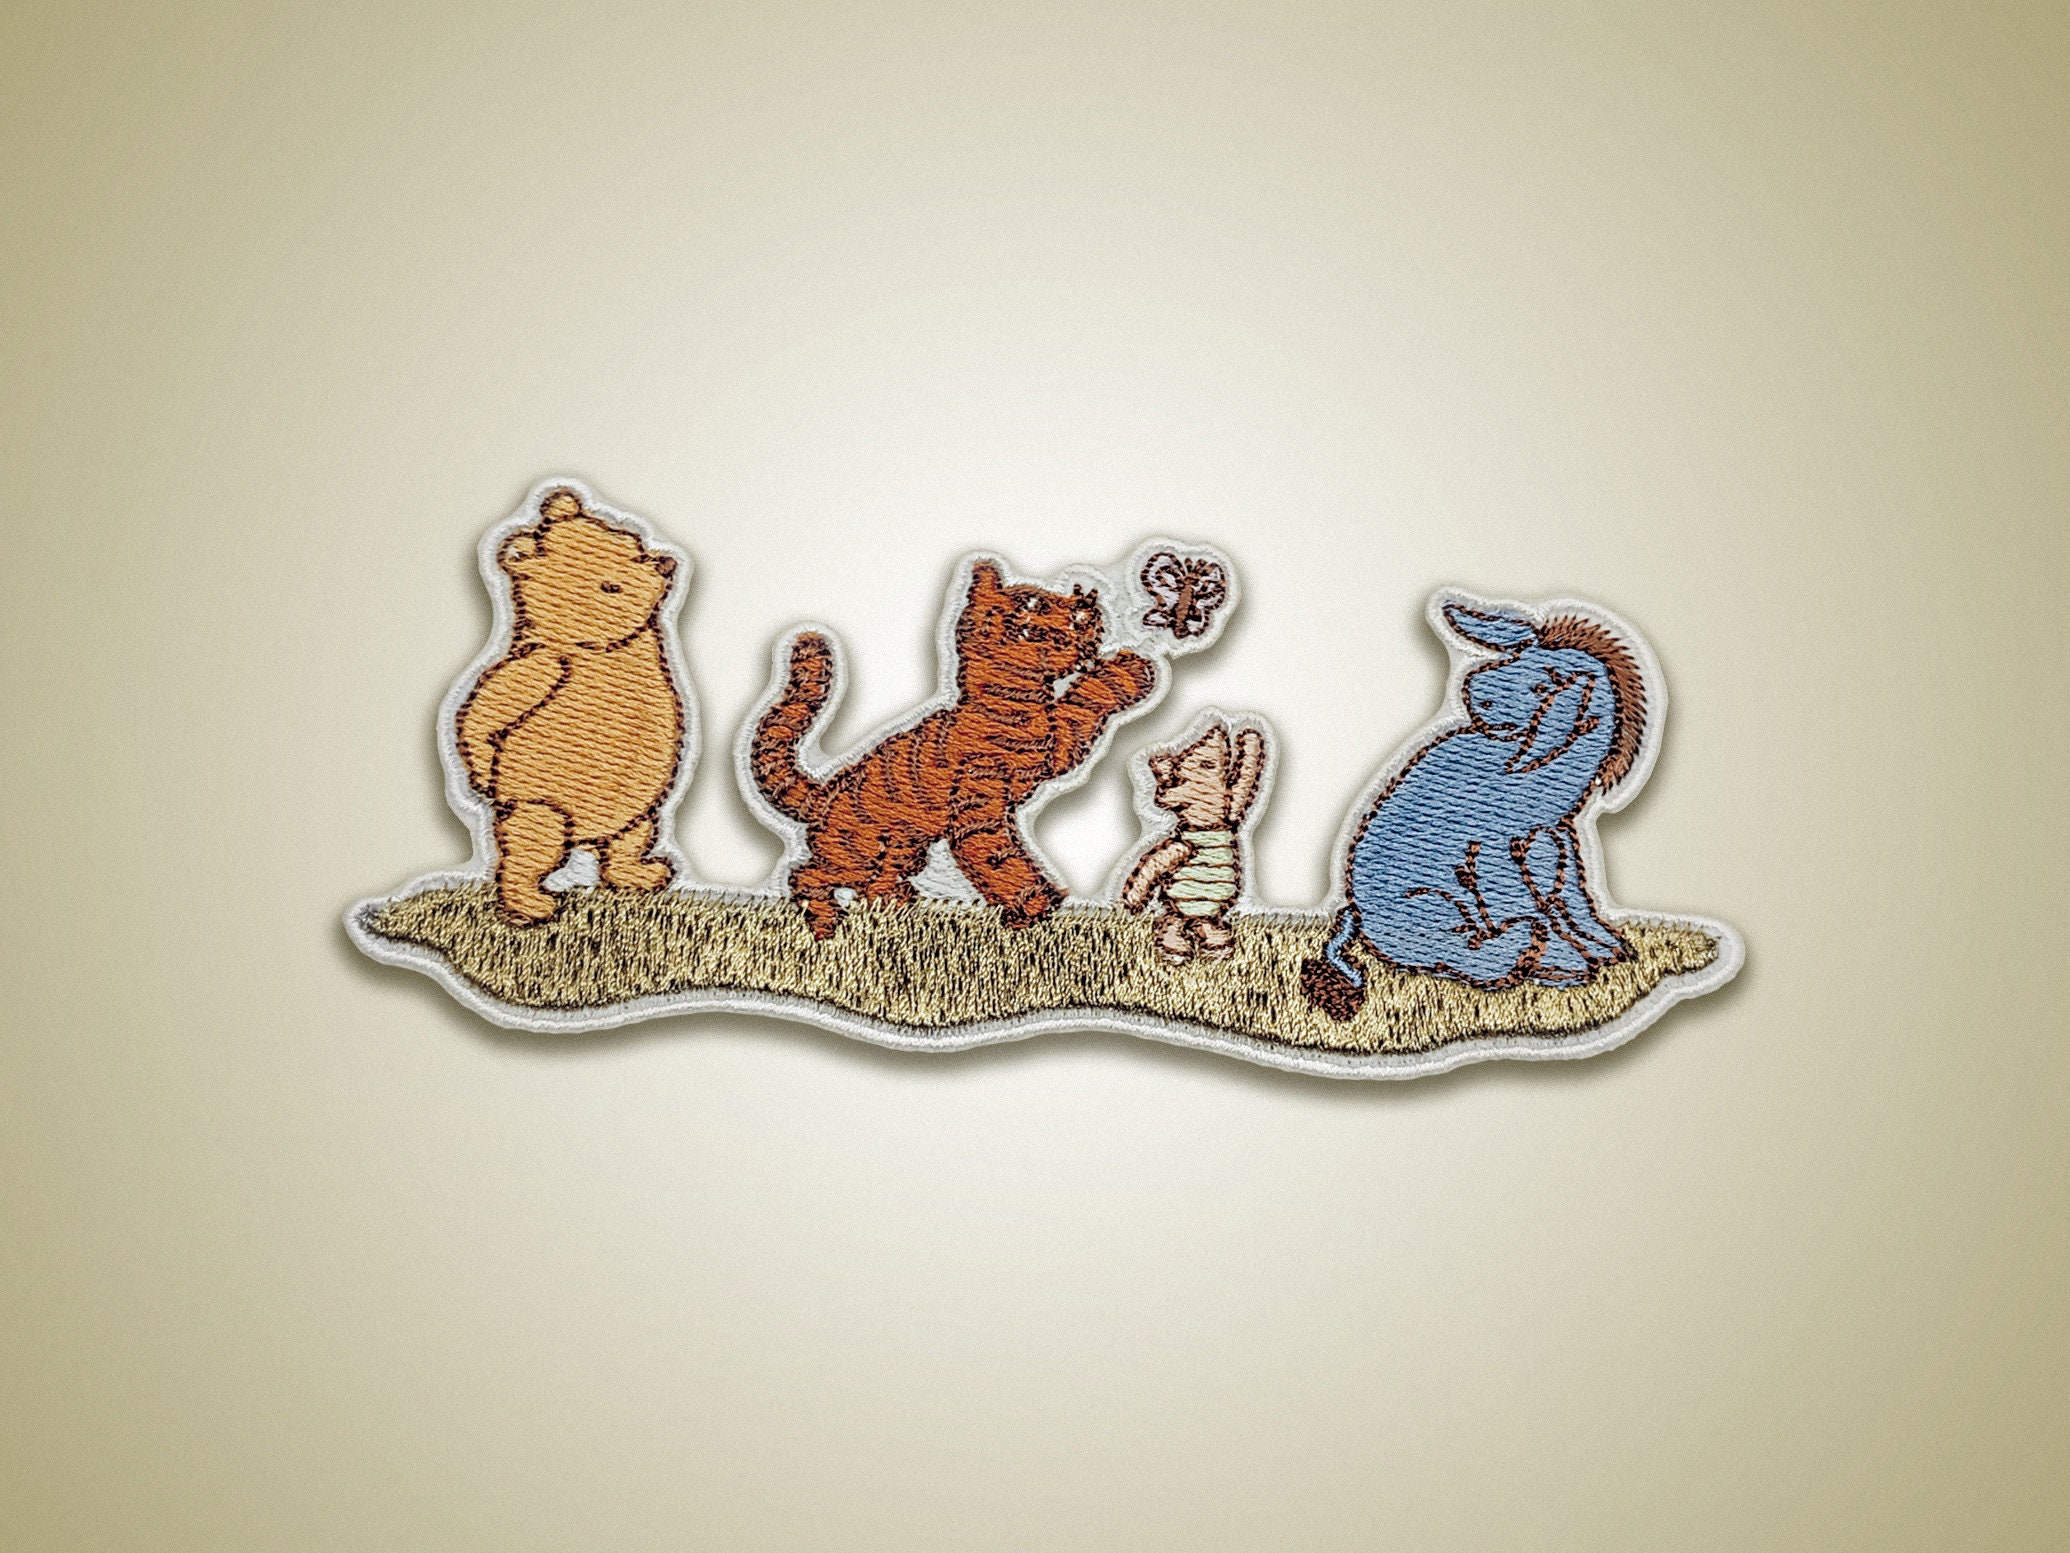 Winnie the Pooh Inspired Iron Patch, Winnie the Pooh Theme Patch, Winnie  the Pooh Converse Patch 